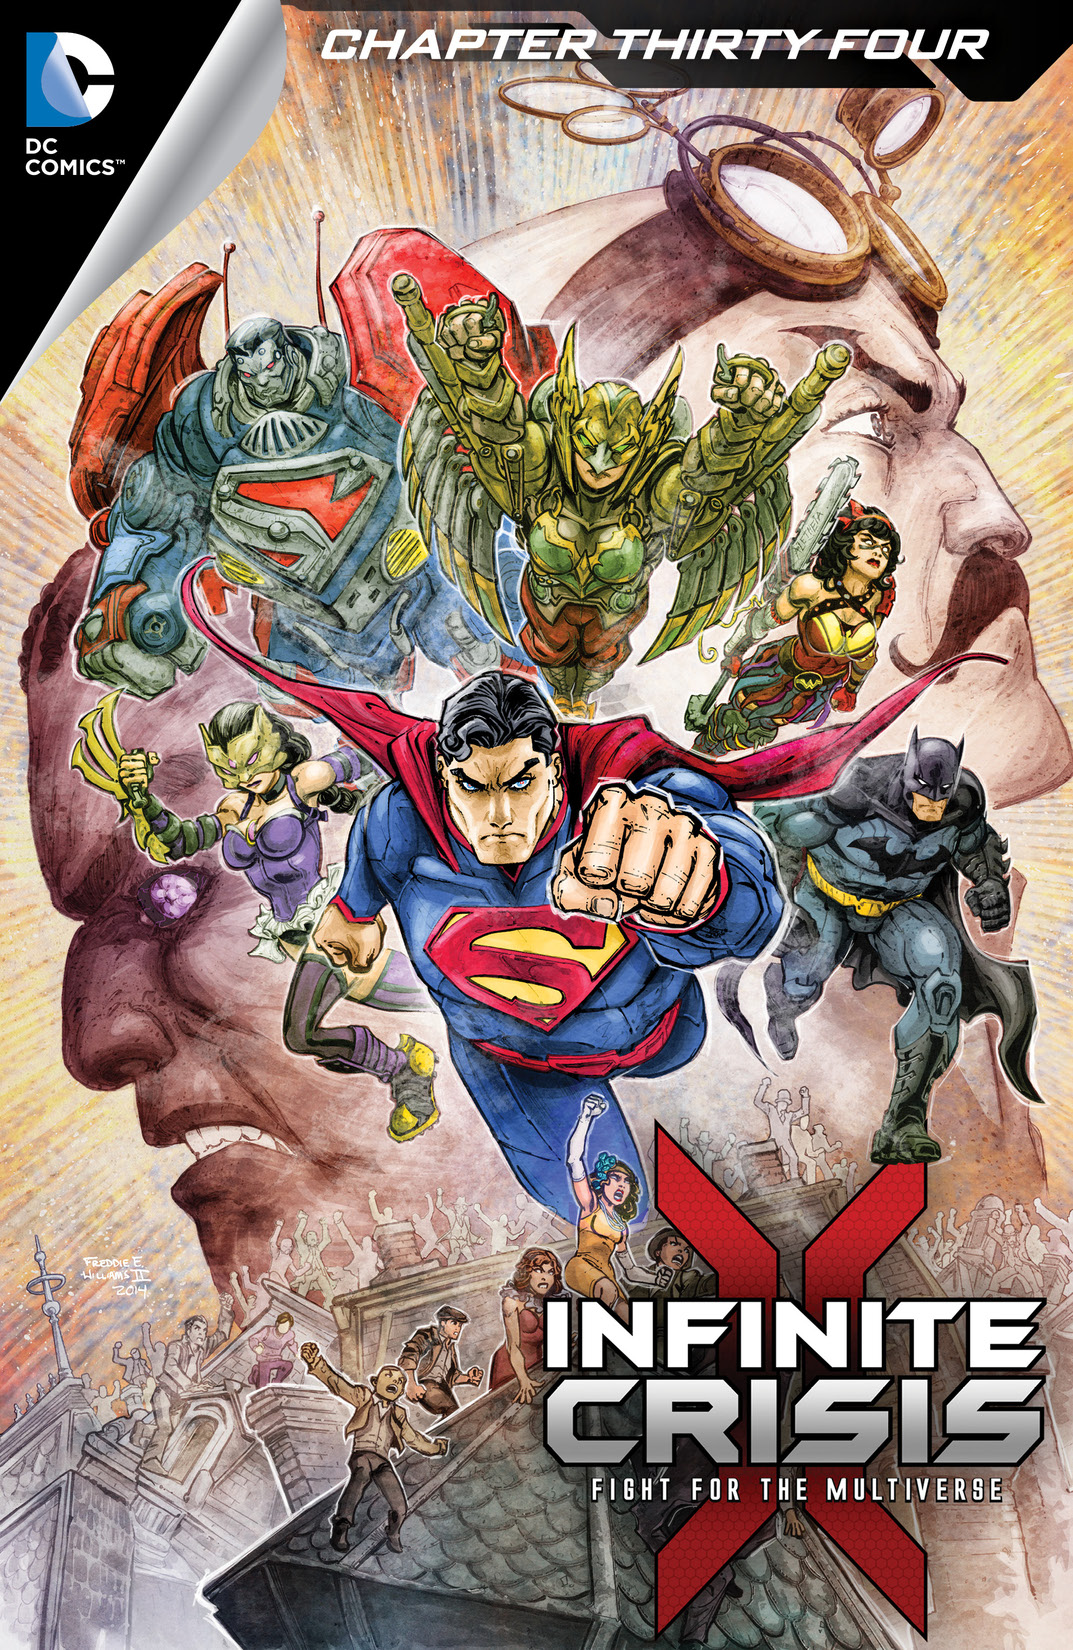 Infinite Crisis: Fight for the Multiverse #34 preview images